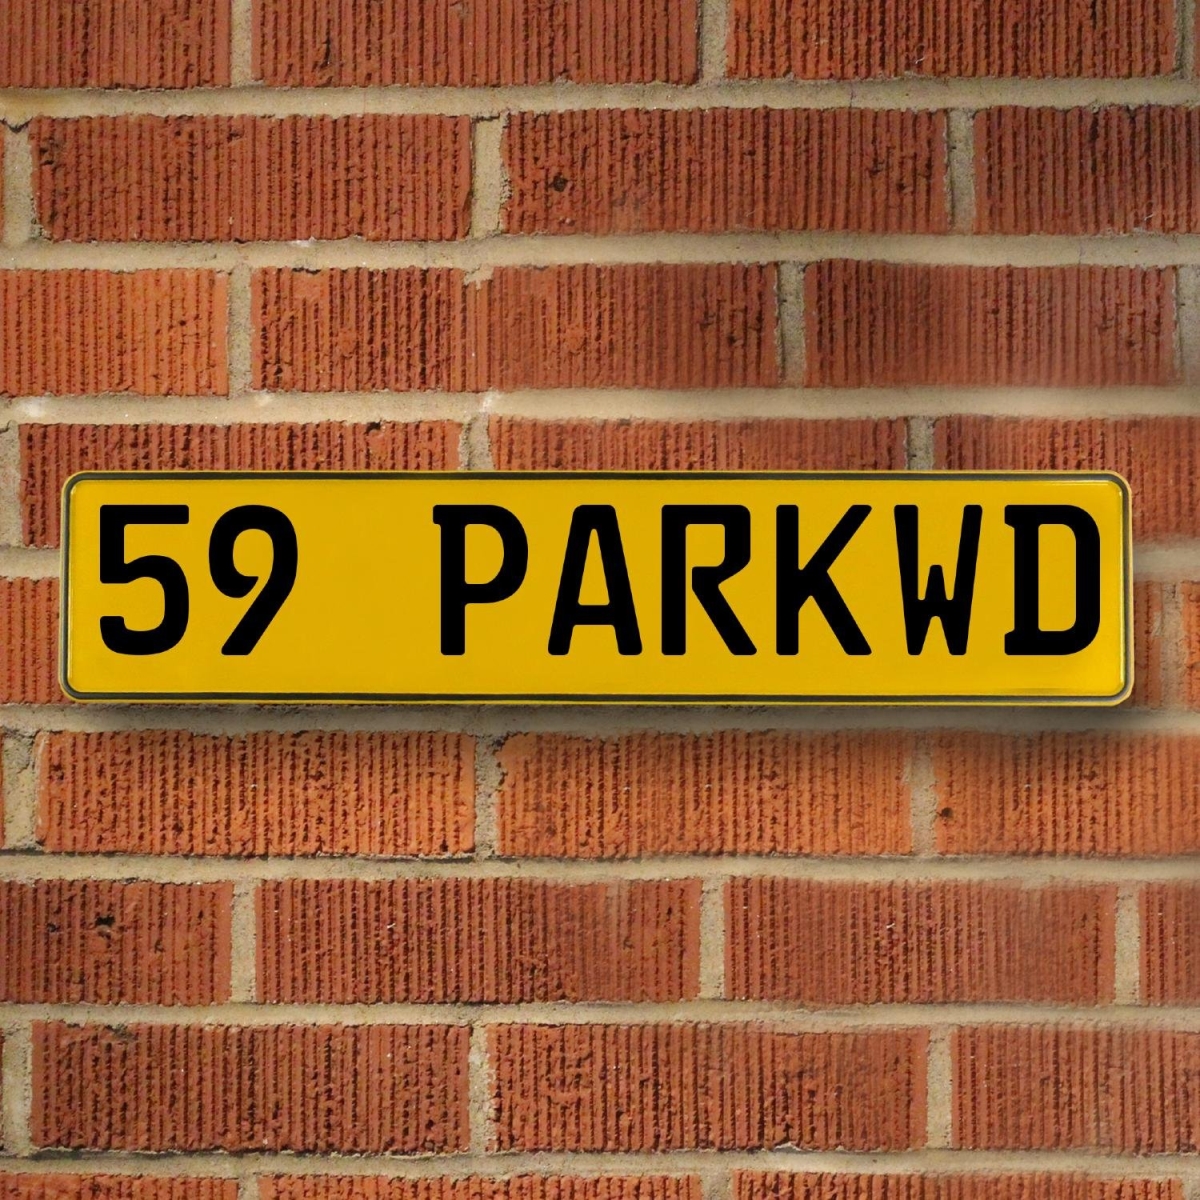 Vintage Parts USA 787319 59 PARKWD - Yellow Aluminum Street Sign Mancave Euro Plate Name Door Sign Wall